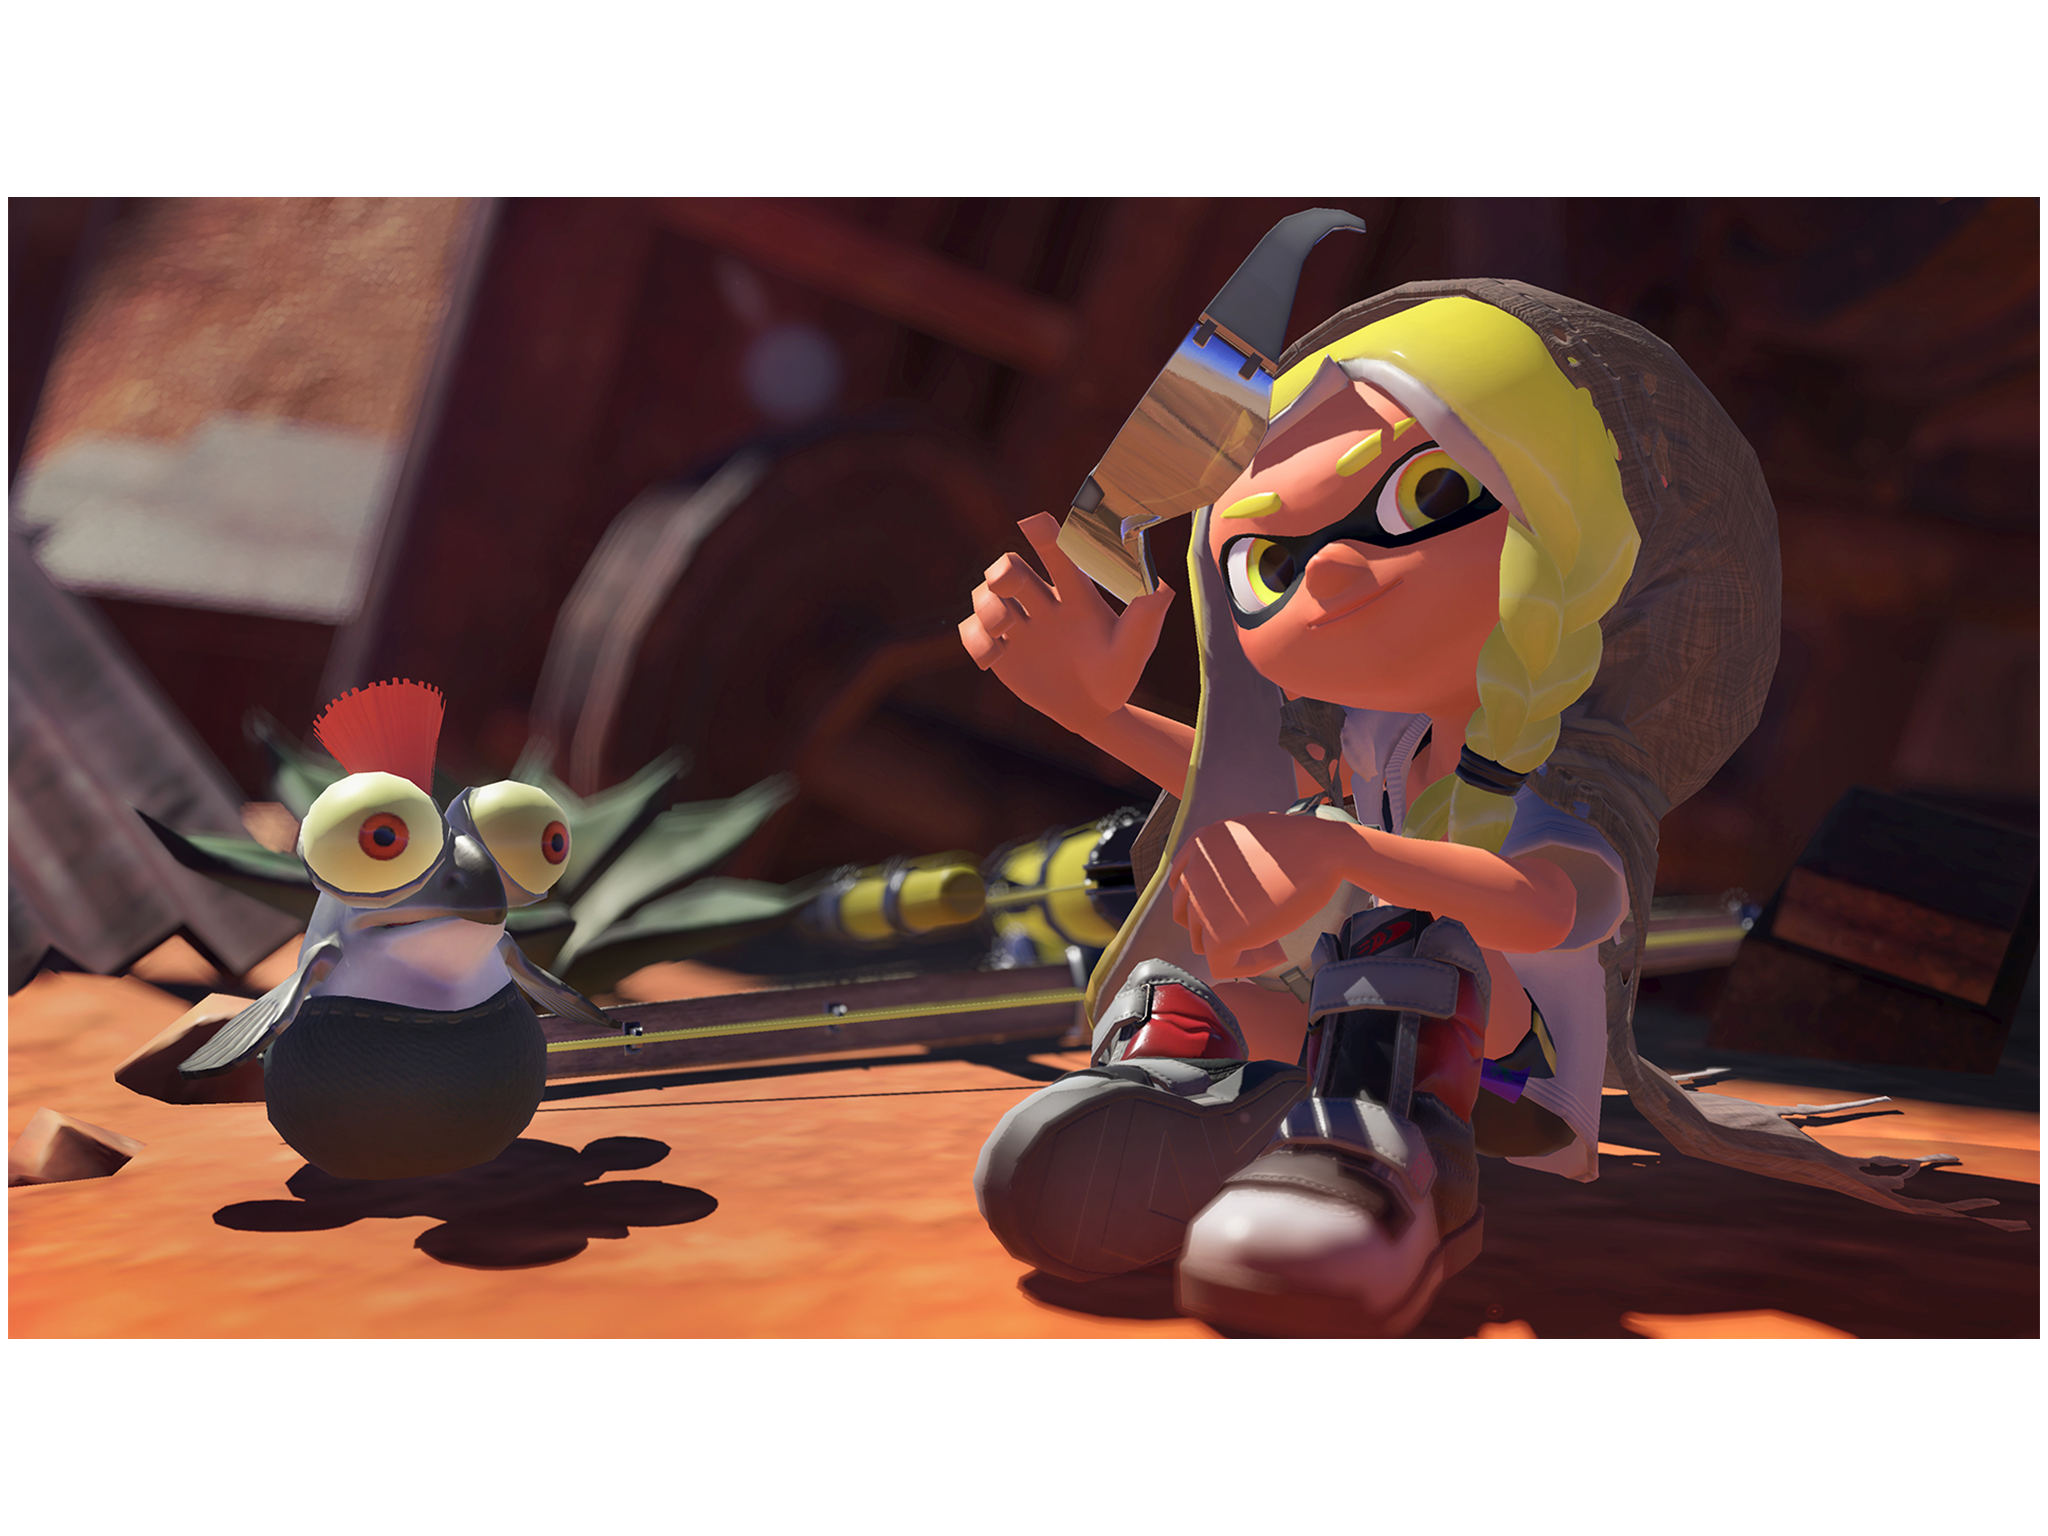 Play as Agent 3 with your companion “Small Fry” in the game’s single-player campaign